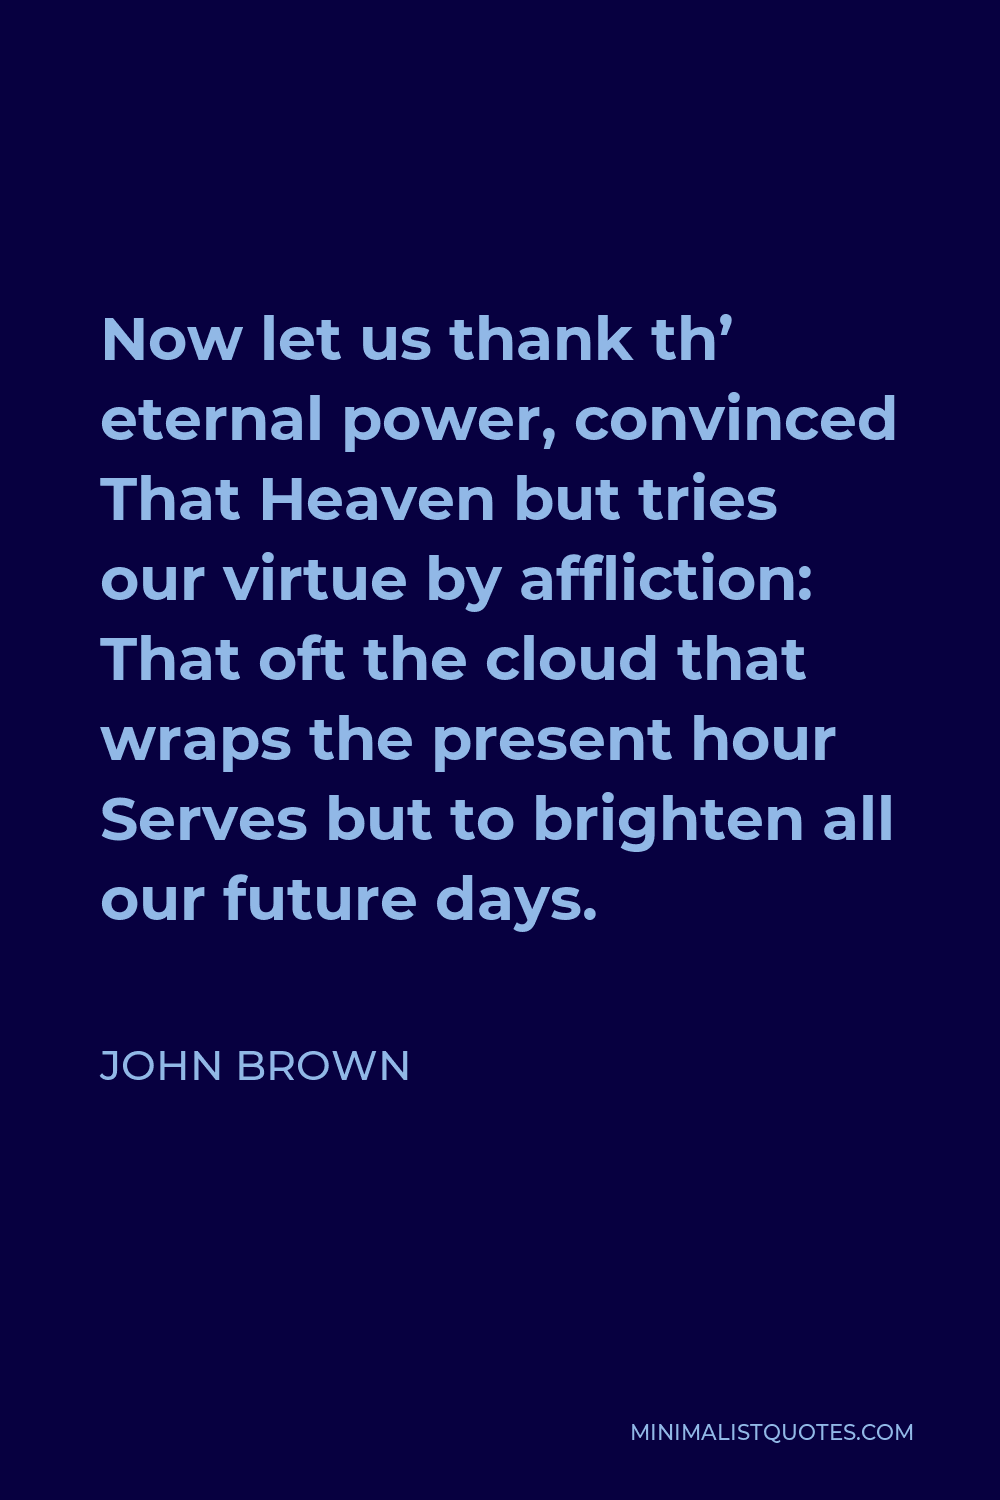 John Brown Quote - Now let us thank th’ eternal power, convinced That Heaven but tries our virtue by affliction: That oft the cloud that wraps the present hour Serves but to brighten all our future days.